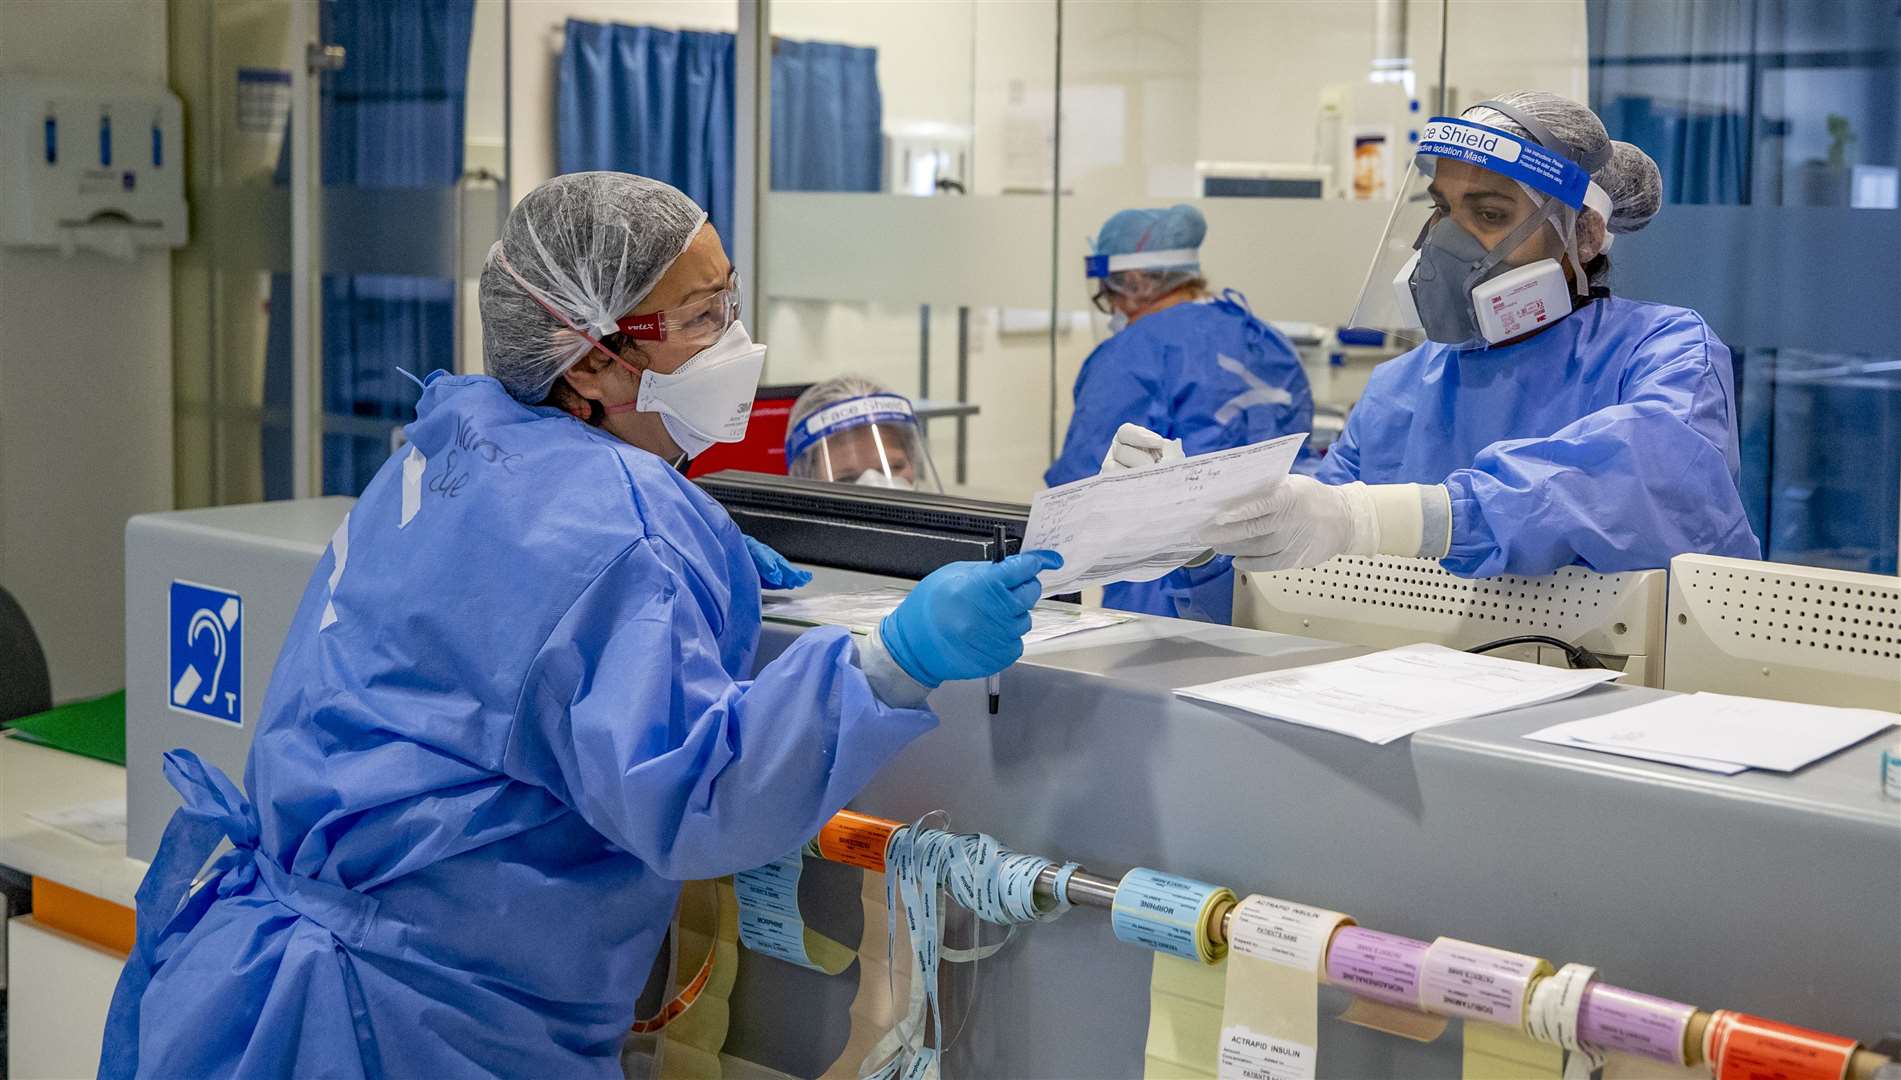 Health workers wearing full personal protective equipment on the intensive care unit (Peter Byrne/PA)